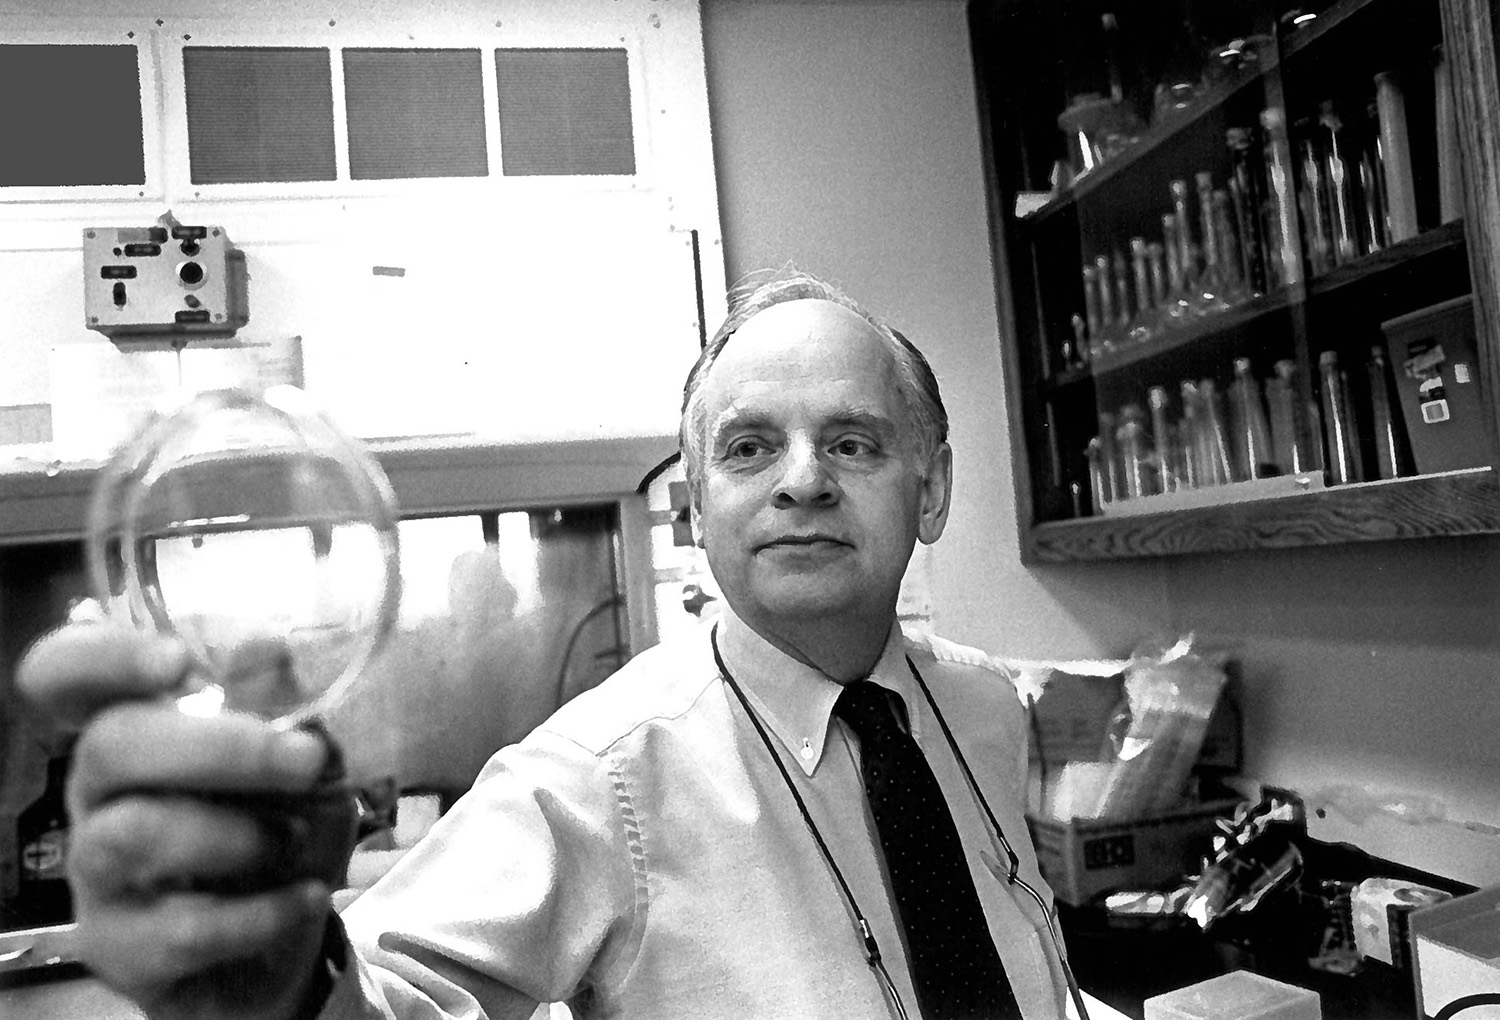 Dr. Seymour Klebanoff changed science’s understanding of the body’s natural defense mechanisms in fighting infections